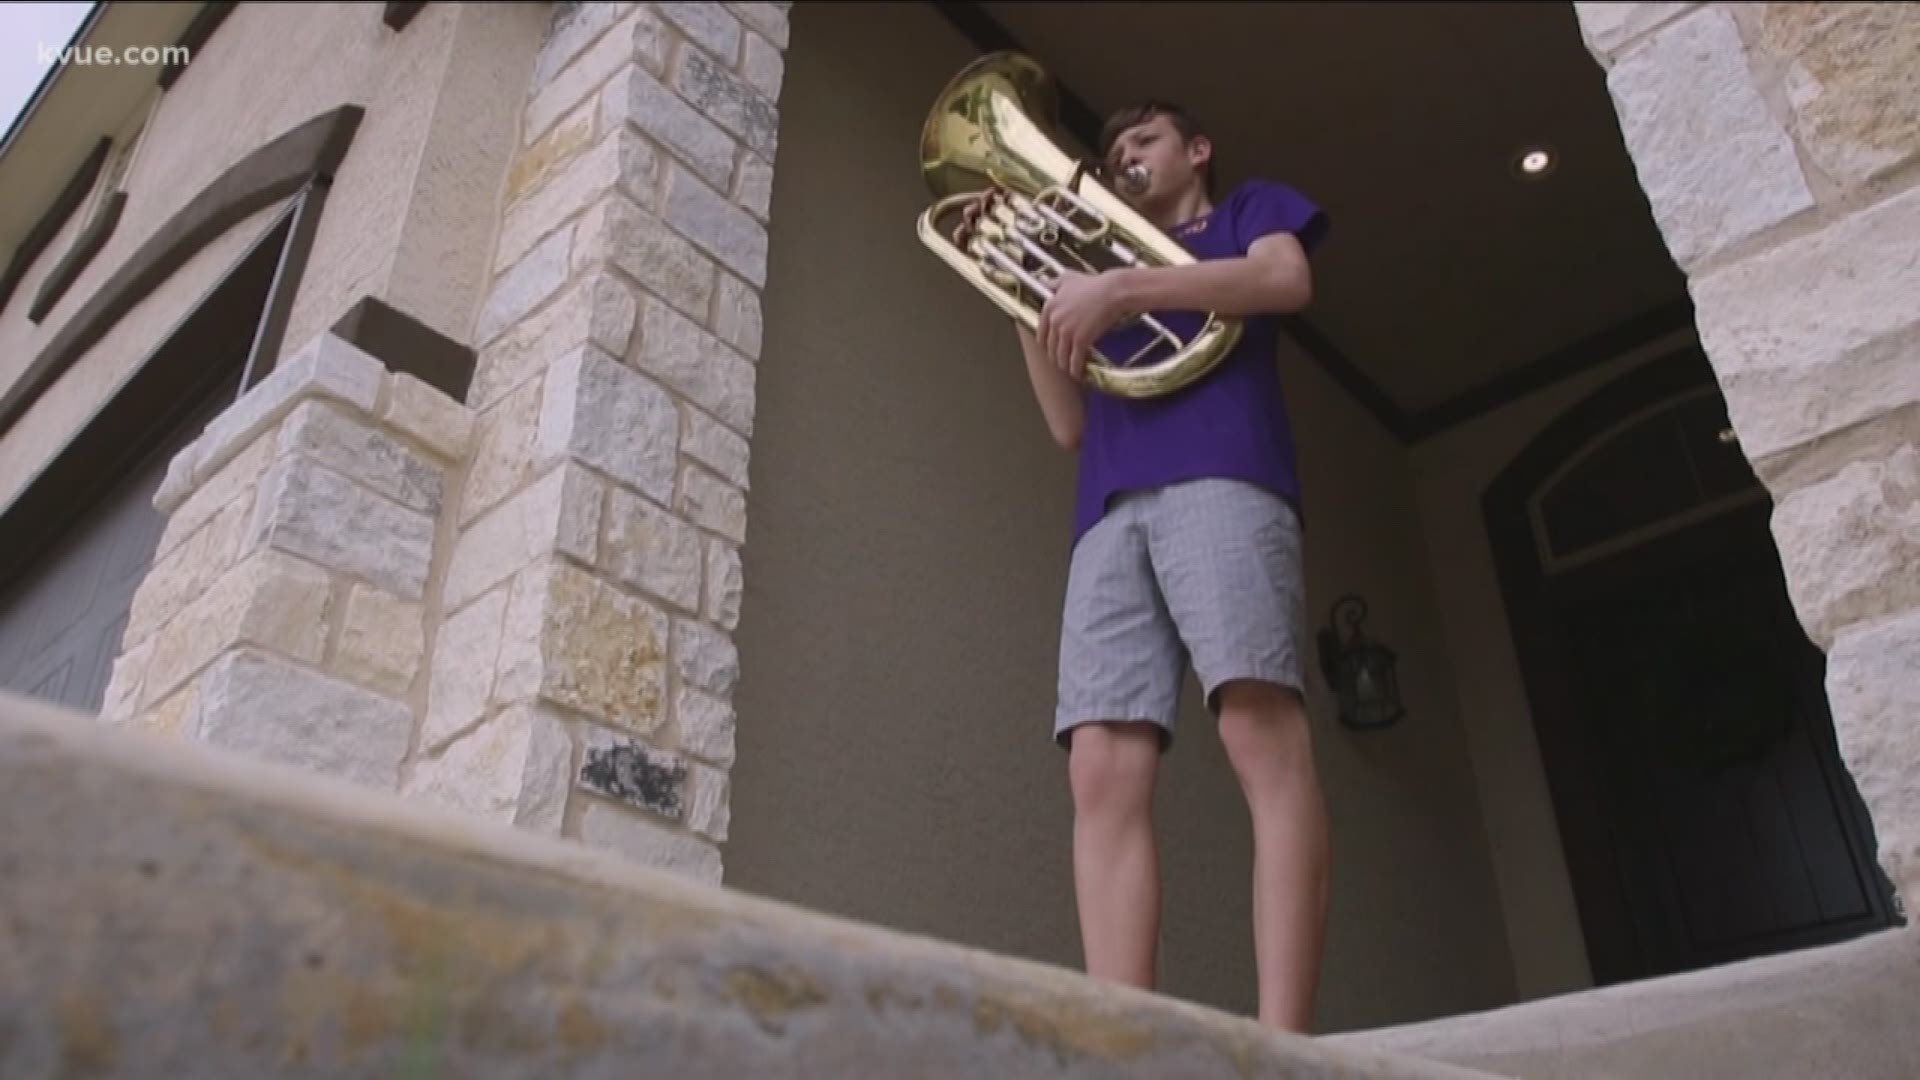 Hank Cavagnaro shows us how music is helping bring students in Liberty Hill together – kind of.